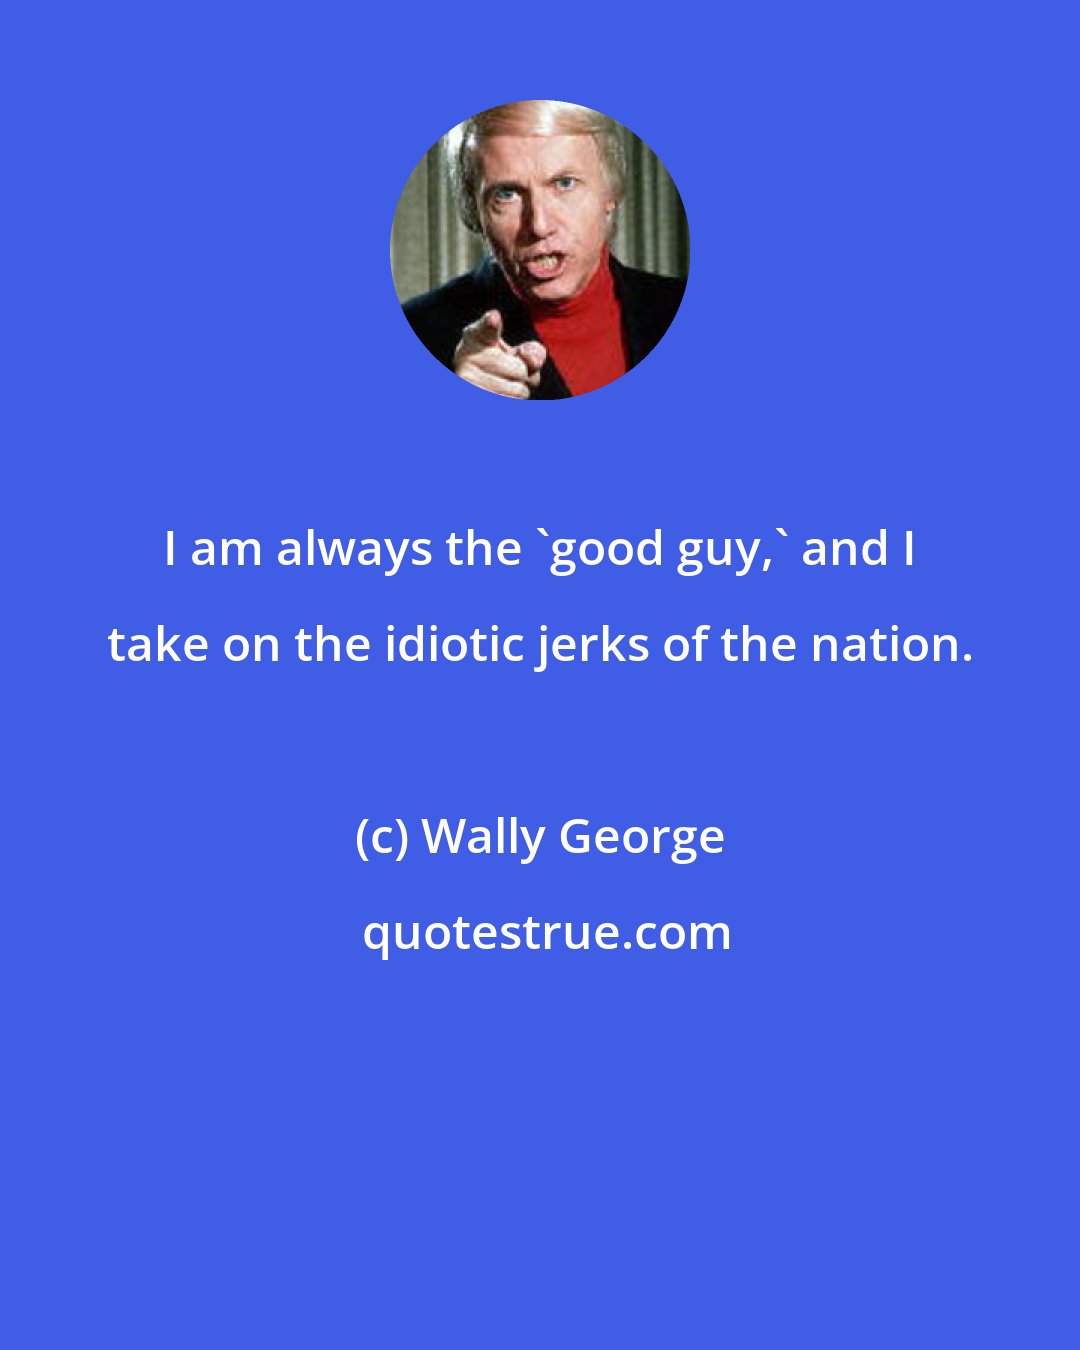 Wally George: I am always the 'good guy,' and I take on the idiotic jerks of the nation.